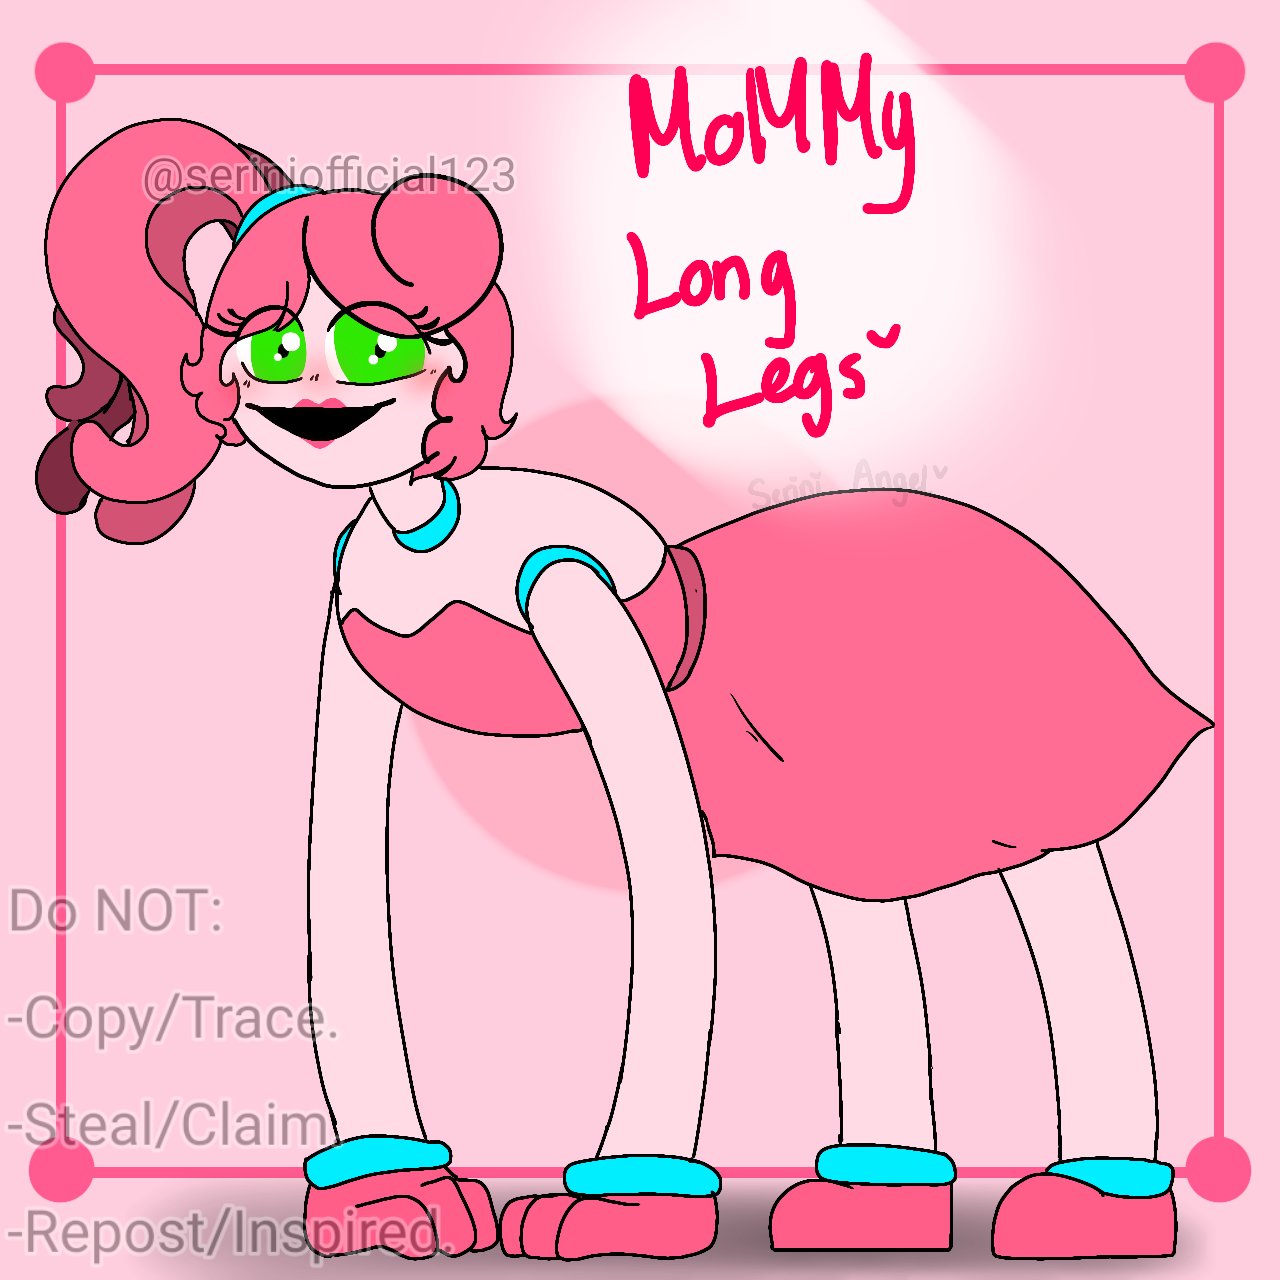 How To Draw Mommy Long Legs  Poppy Playtime Chapter 2 